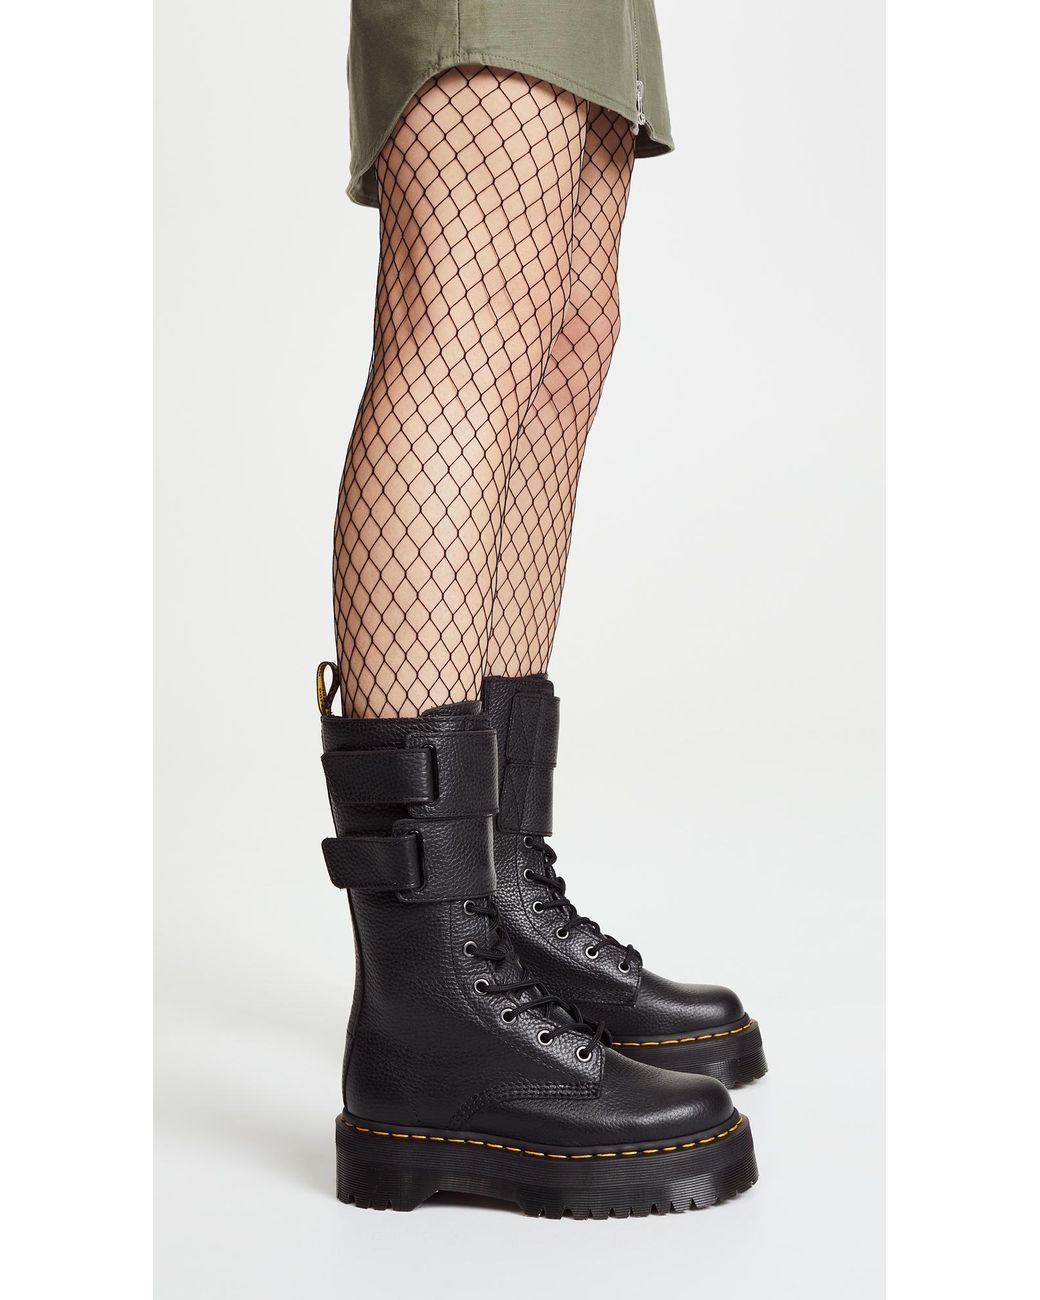 Dr Martens Jagger 10 Eye Aunt Sally Boots | lupon.gov.ph